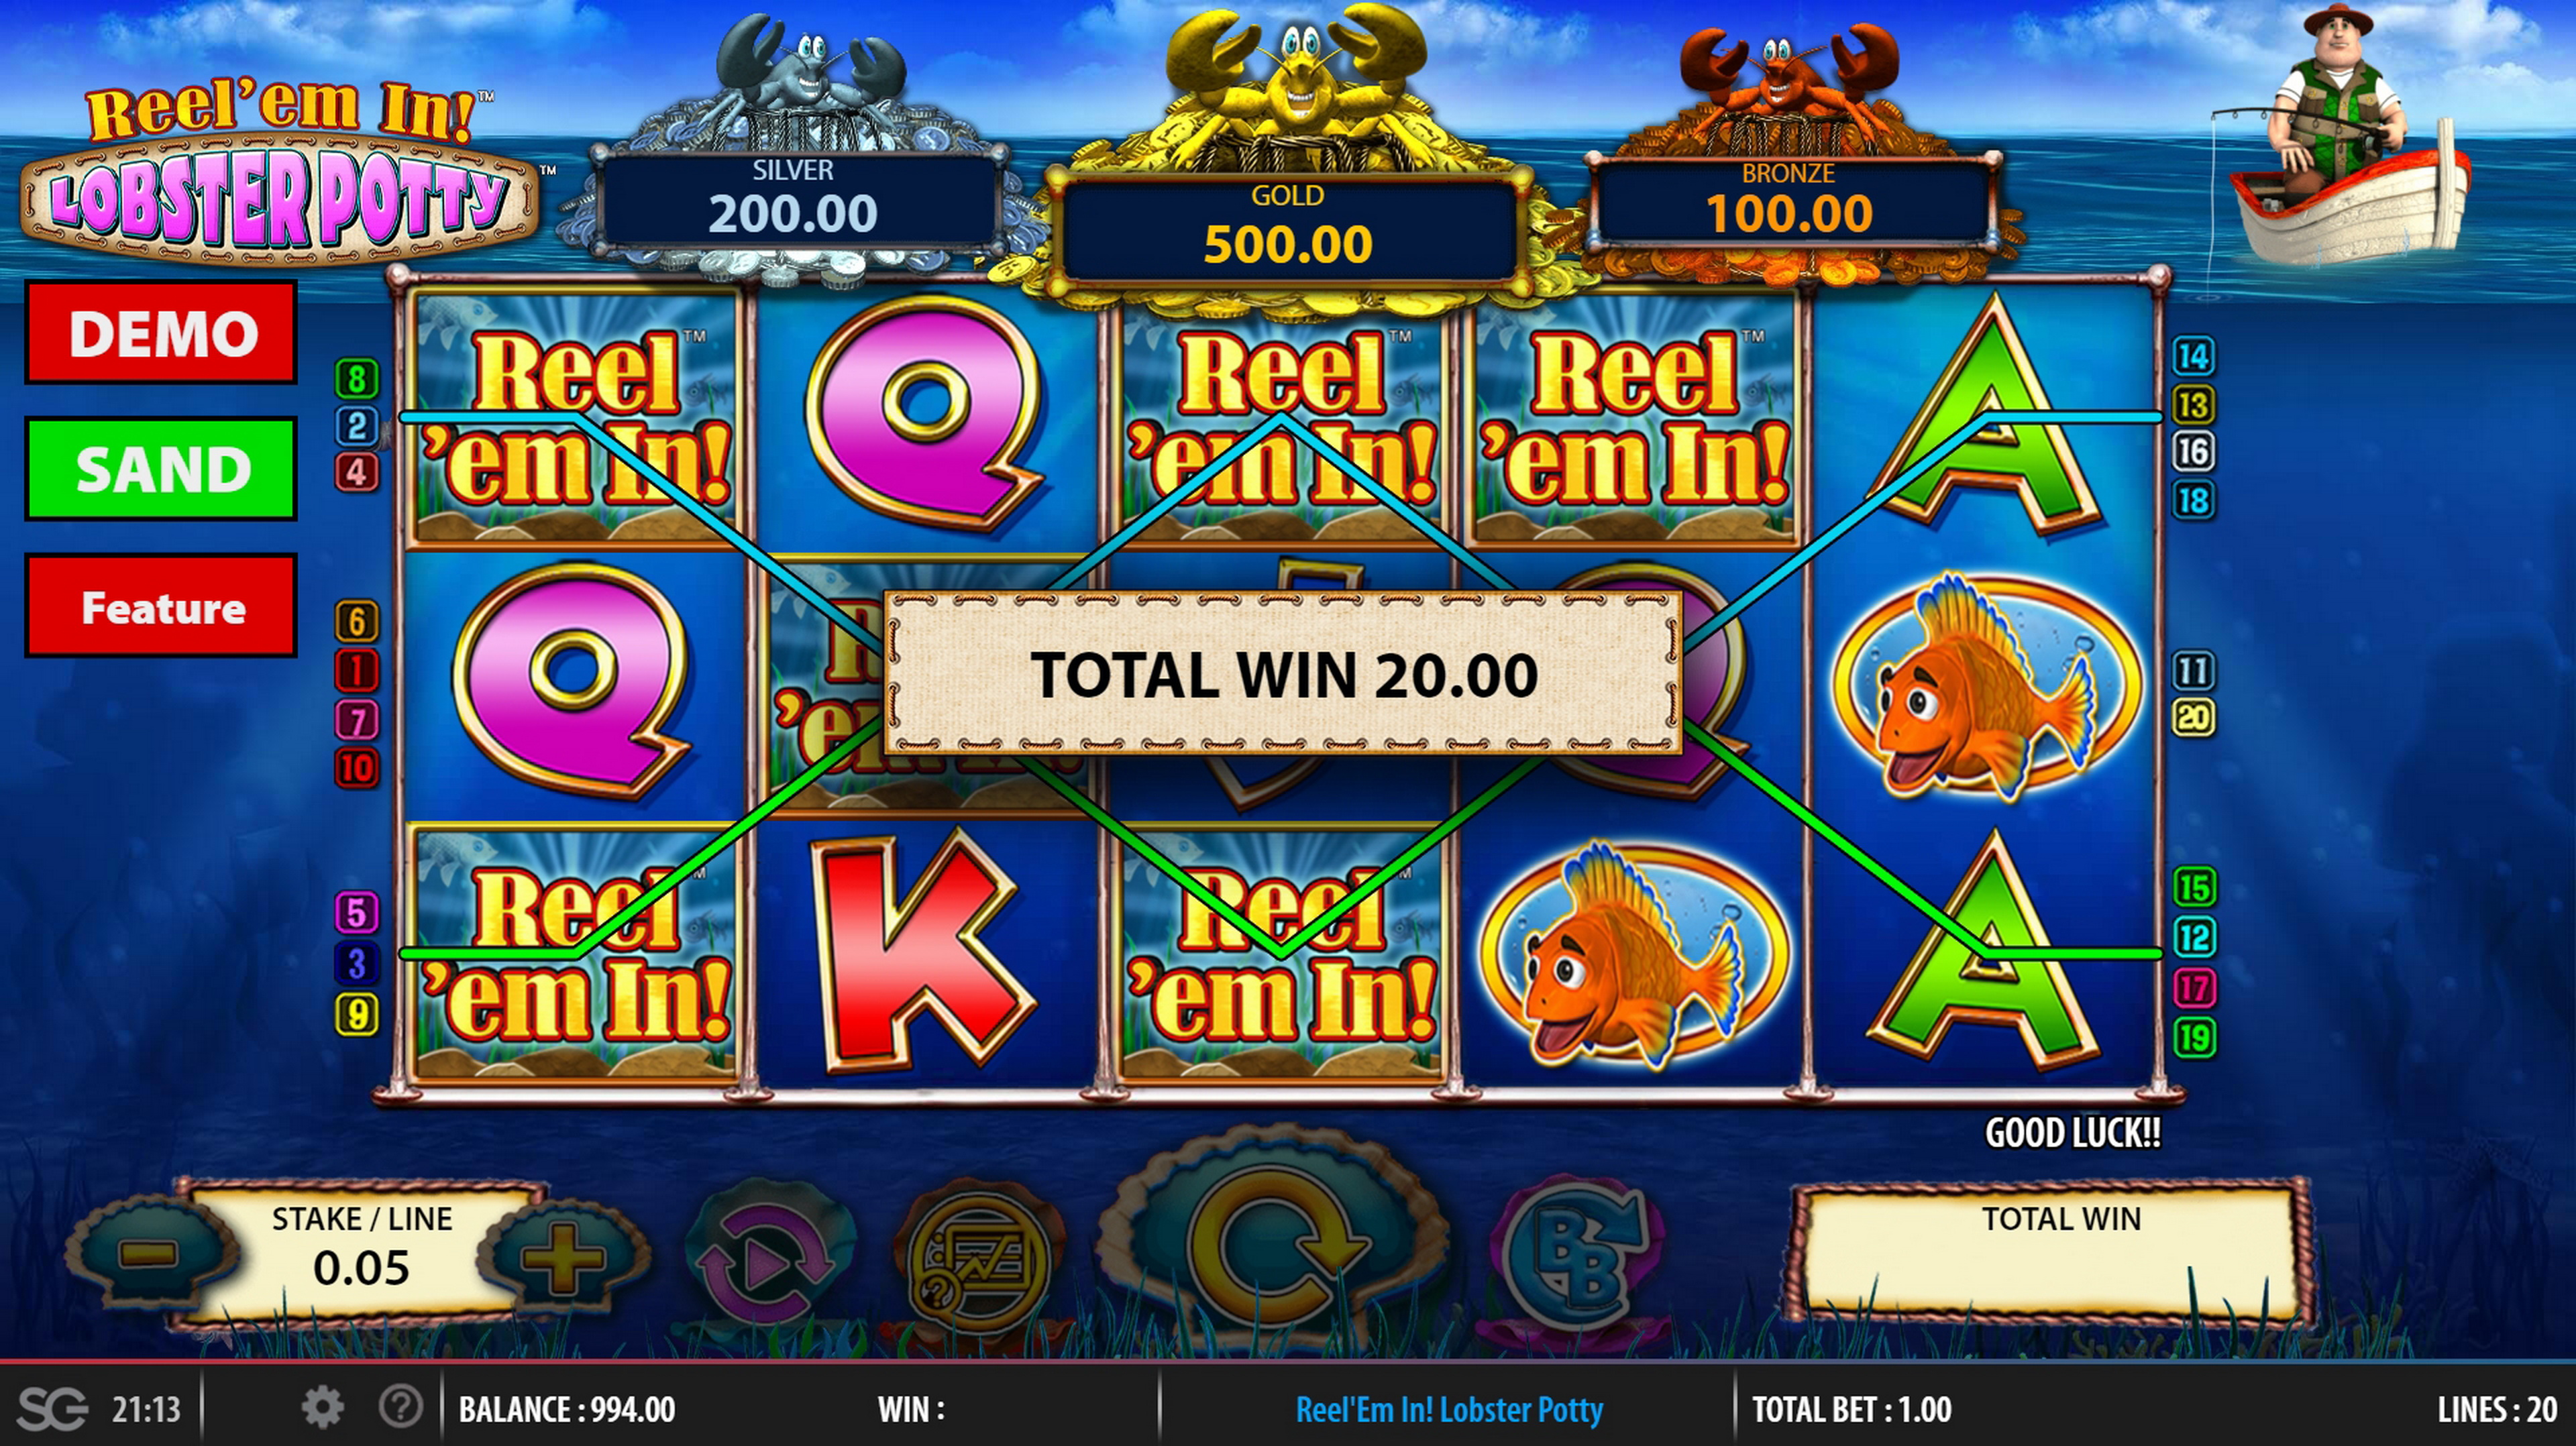 Win Money in Reel 'em In Lobster Potty Free Slot Game by Barcrest Games